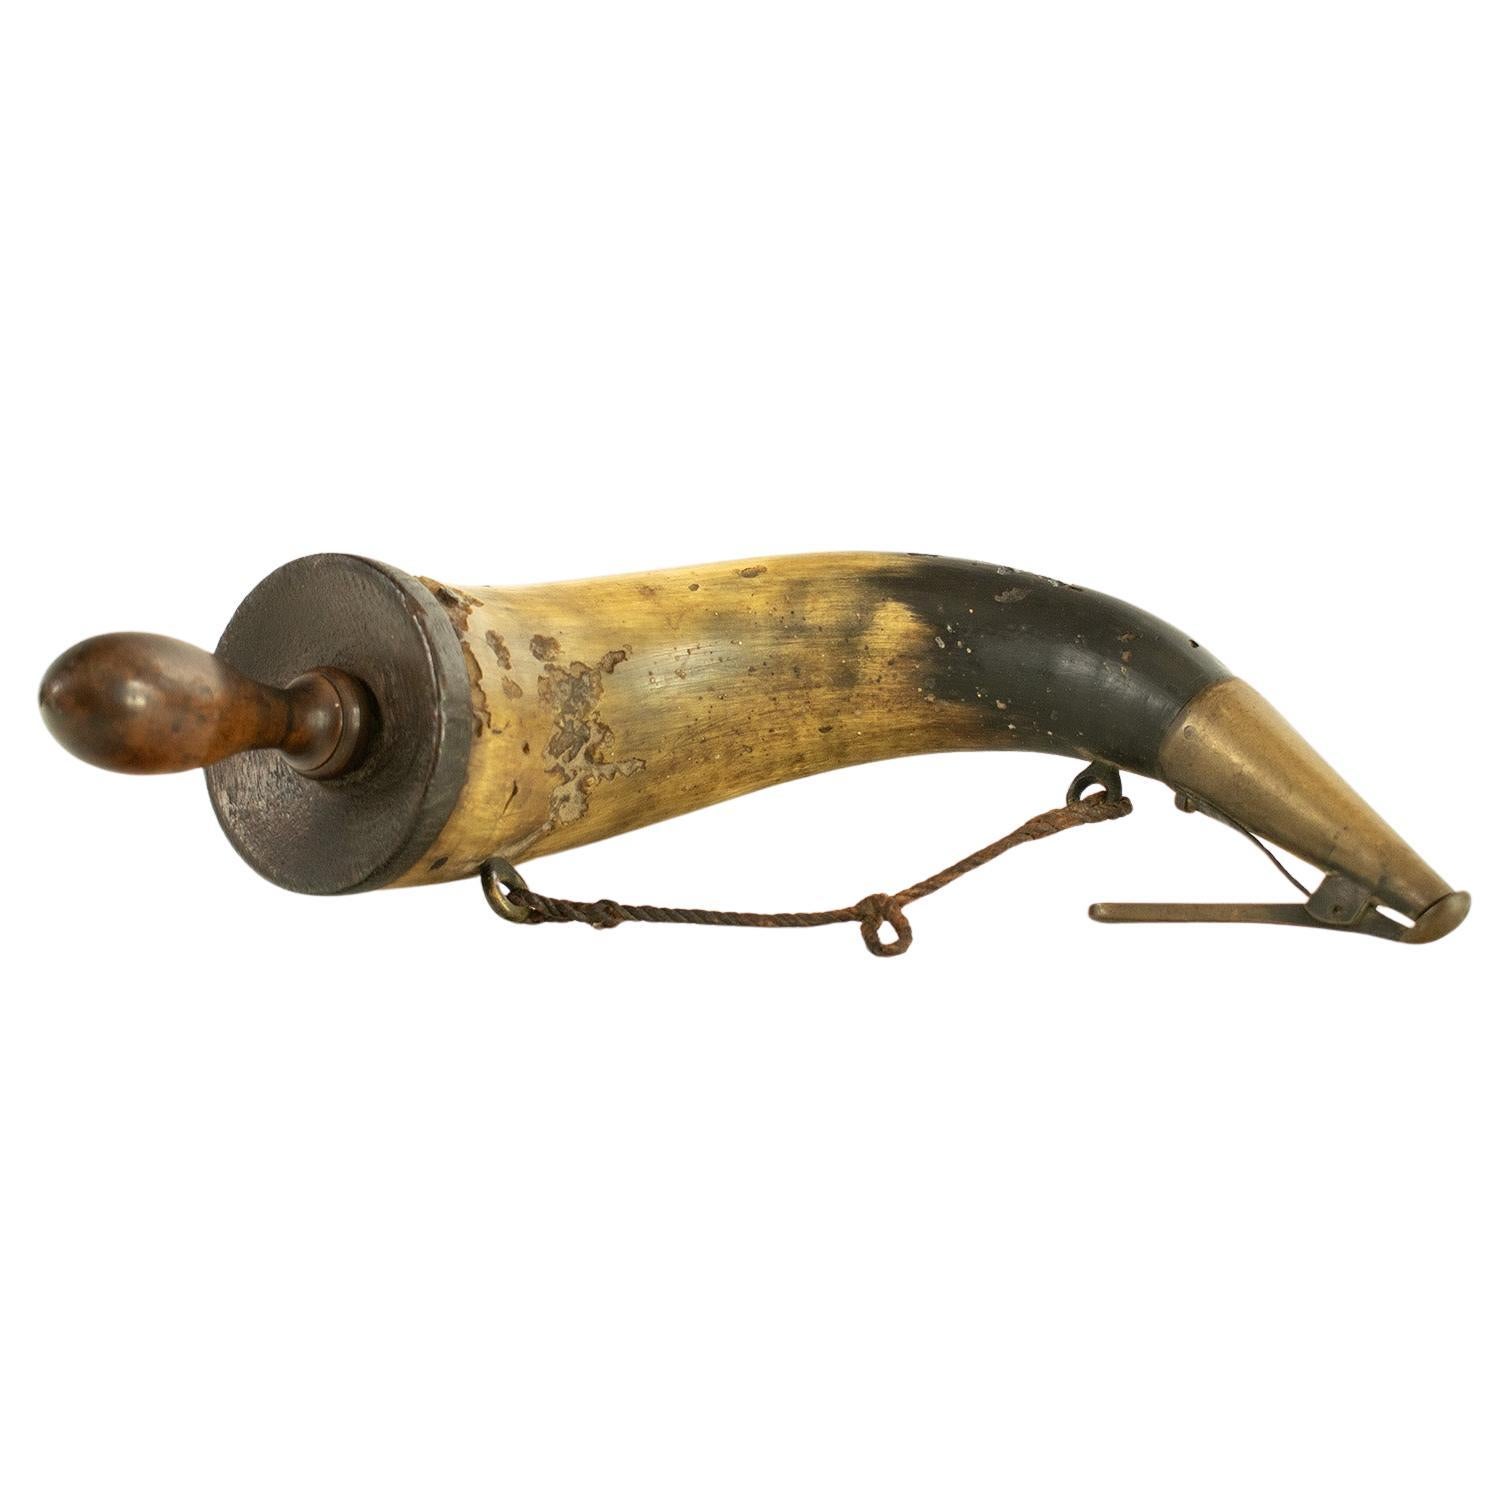 LARGE GUNNER'S POWDER HORN Naval - French, late 18th century.